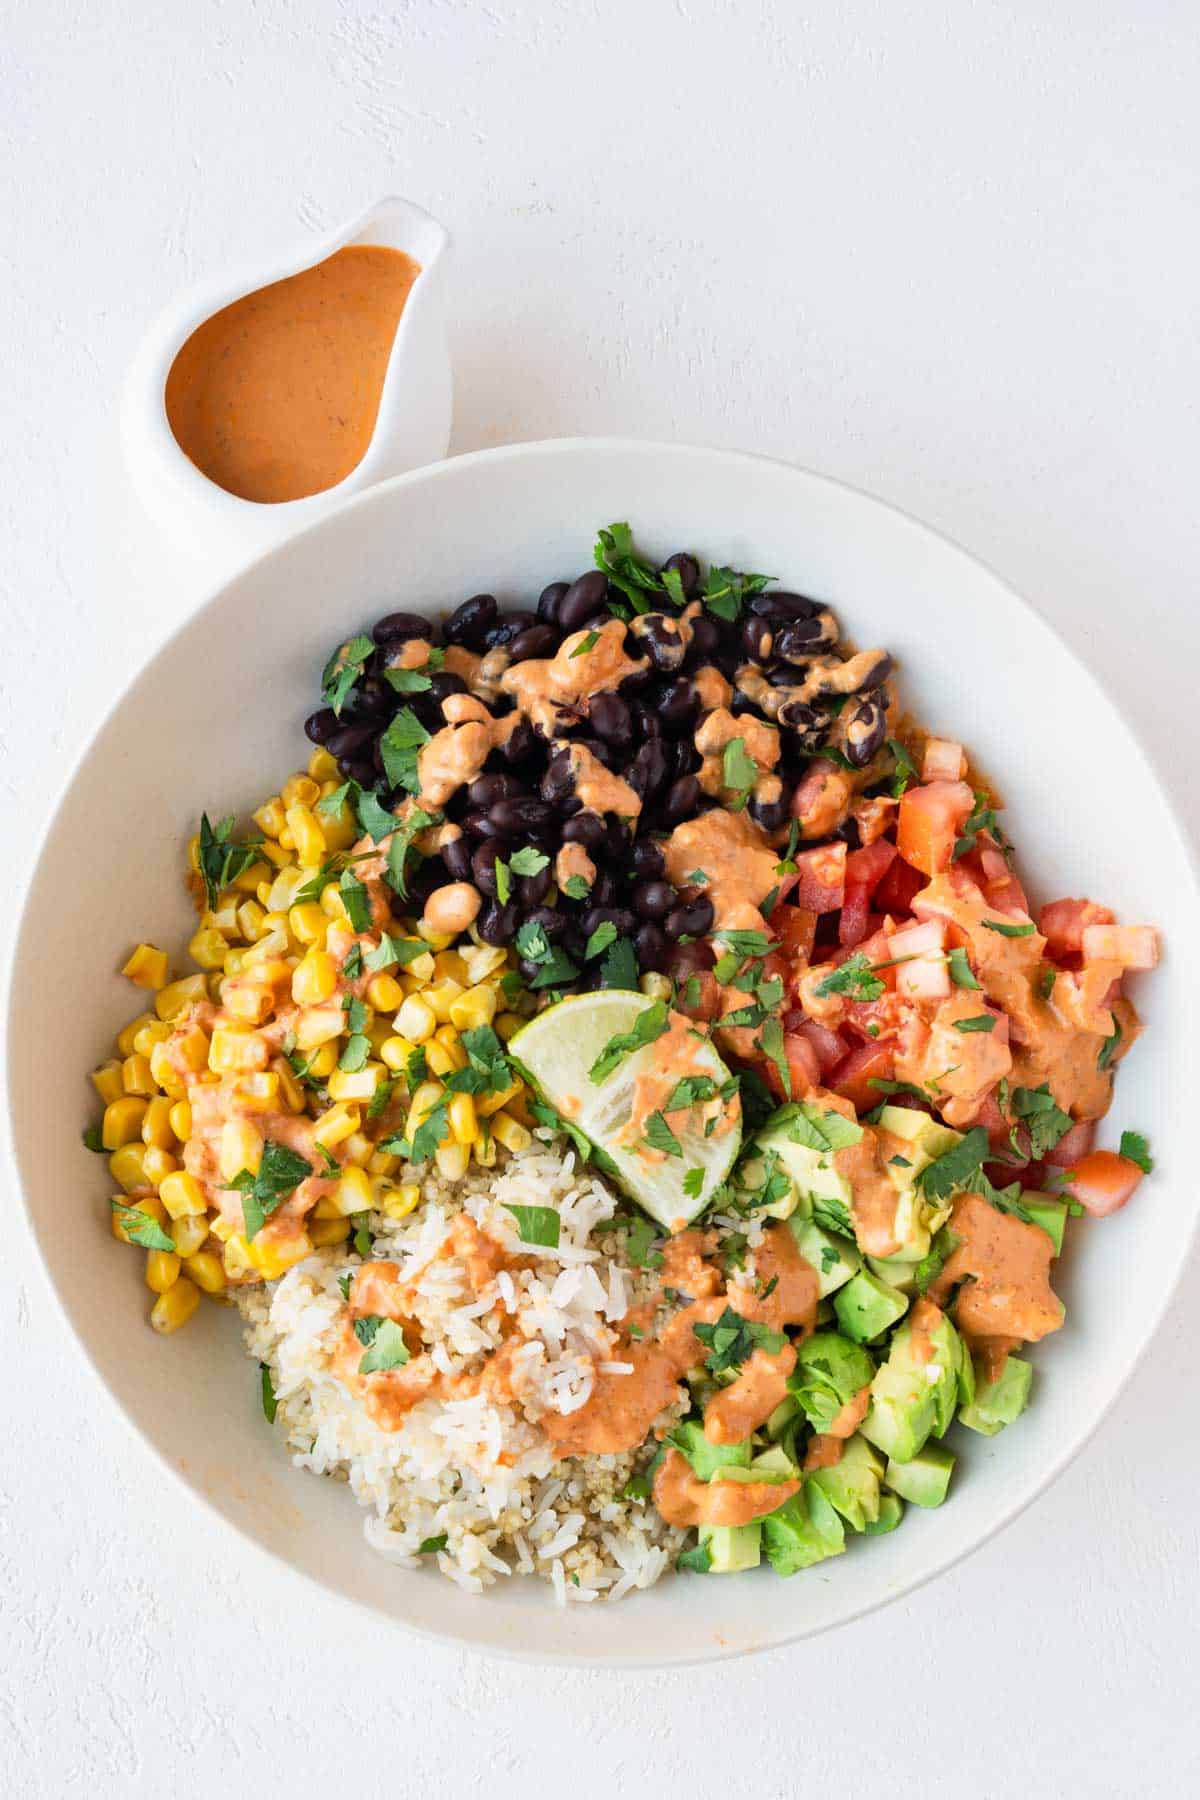 Baja bowl with rice, quinoa, avocado, tomatoes, black beans, corn, lime, and Bala sauce drizzled on top.